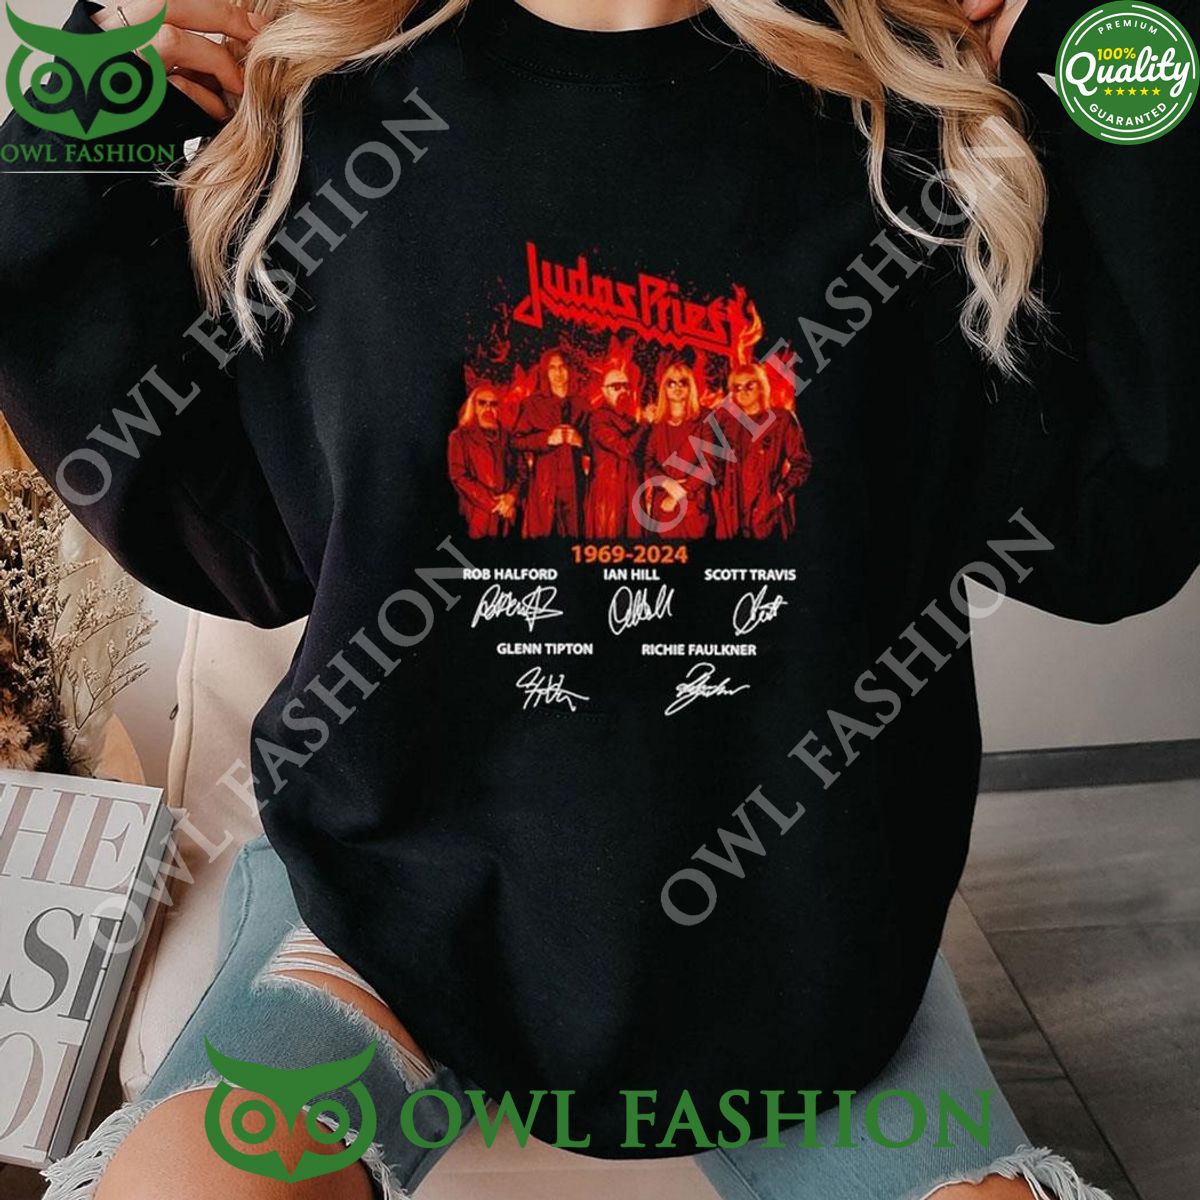 Judas Priest 1969 2024 Signatures 2D Sweatshirt The composition is flawless.